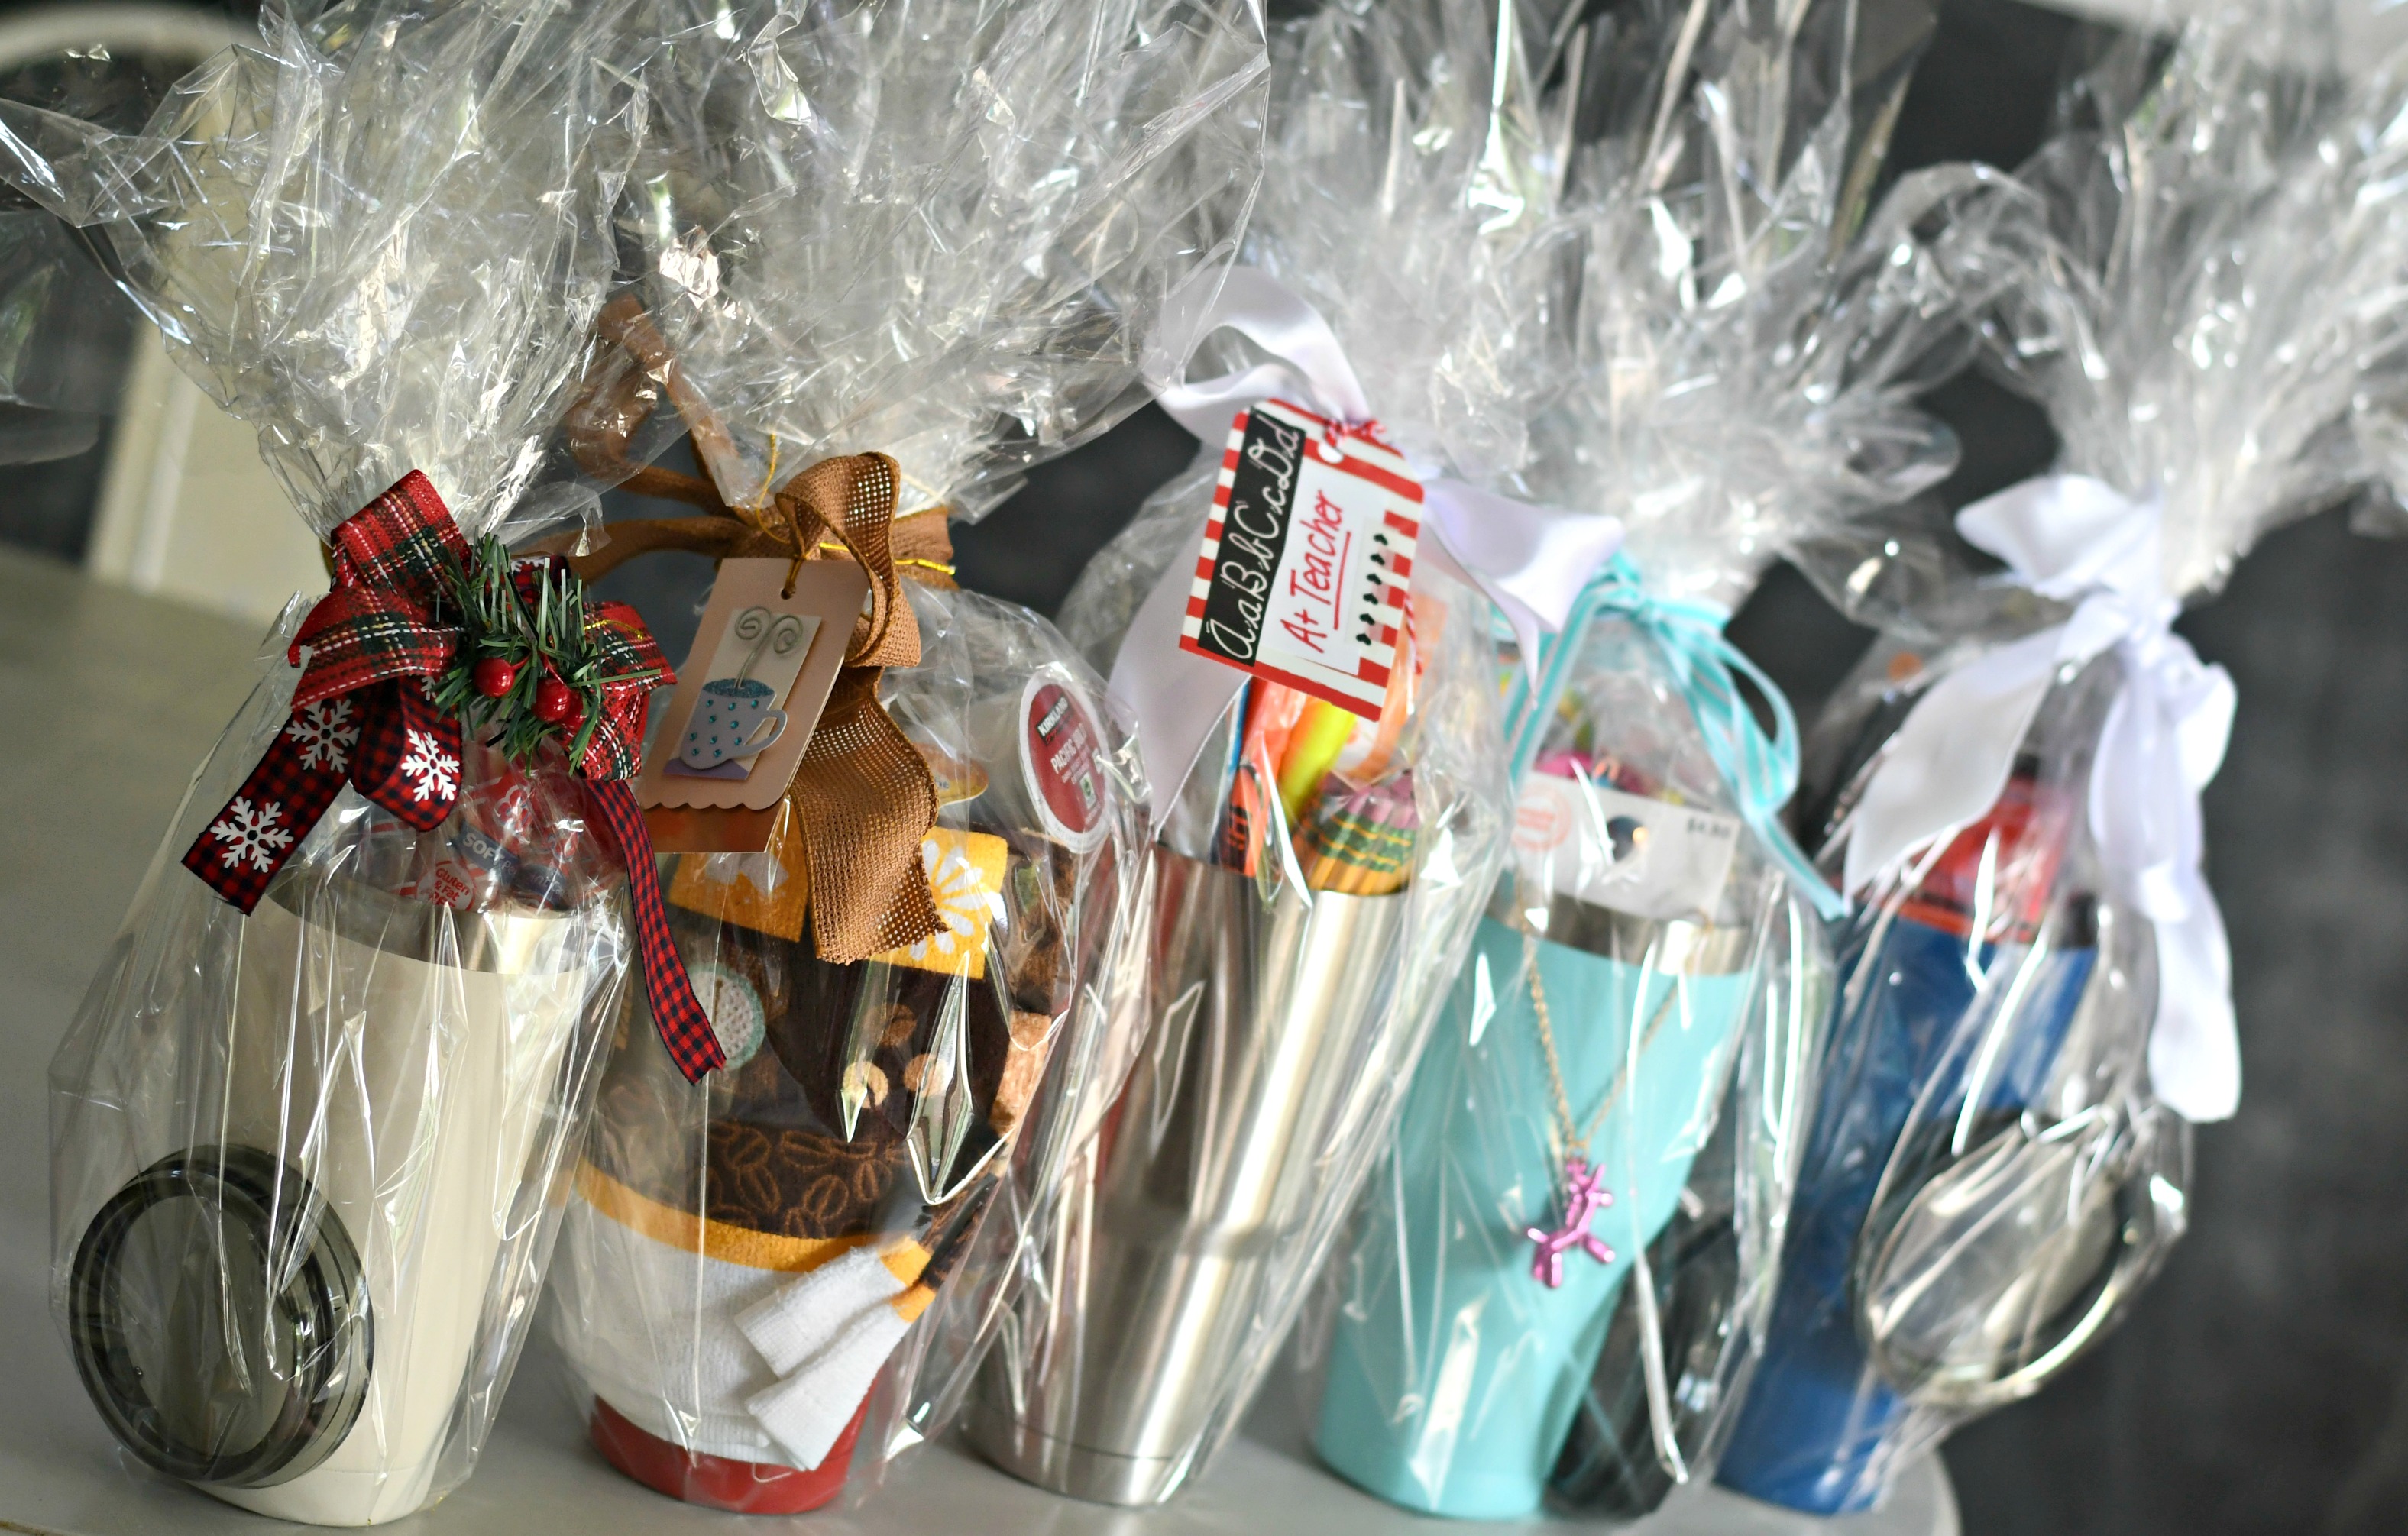 DIY Tumbler Gift basket ideas – tumblers wrapped in cellophane with cards and ribbon